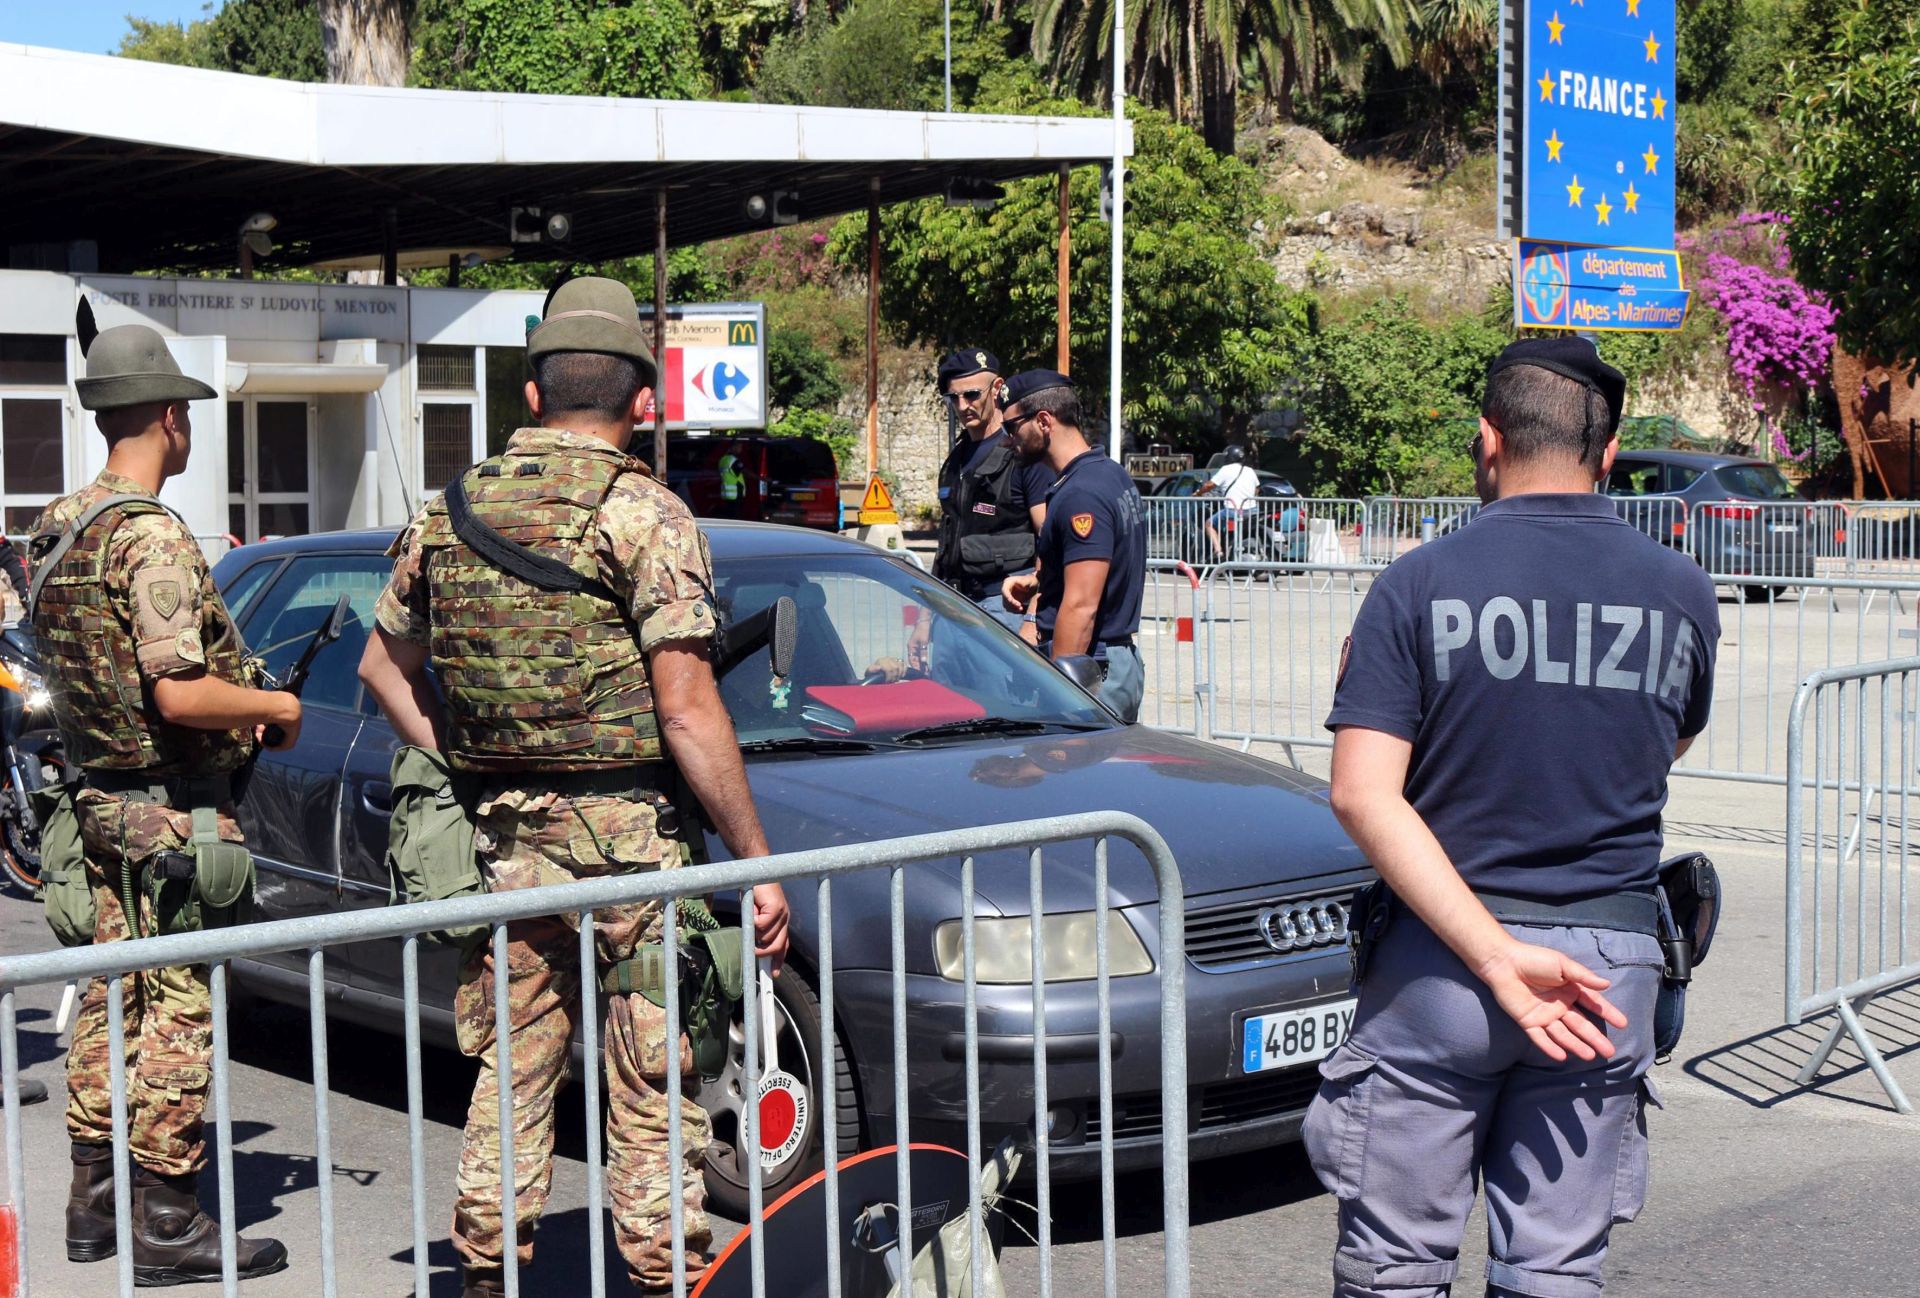 epa05426073 Italian police and Alpini (Mountain troops) of the Italian Army check vehicles at the border checkpoint between France and Italy, in Ventimiglia, Italy, 15 July 2016. Controlls were tightened at the Italian-French border as a reaction to the Nice truck attack on late 14 July 2016. According to reports, at least 84 people died and many were injured after a truck drove into the crowd on the famous Promenade des Anglais in Nice, France, during celebrations of Bastille Day. Anti-terrorism police took over the investigation in the incident, media added.  EPA/LORENZO BALLESTRA